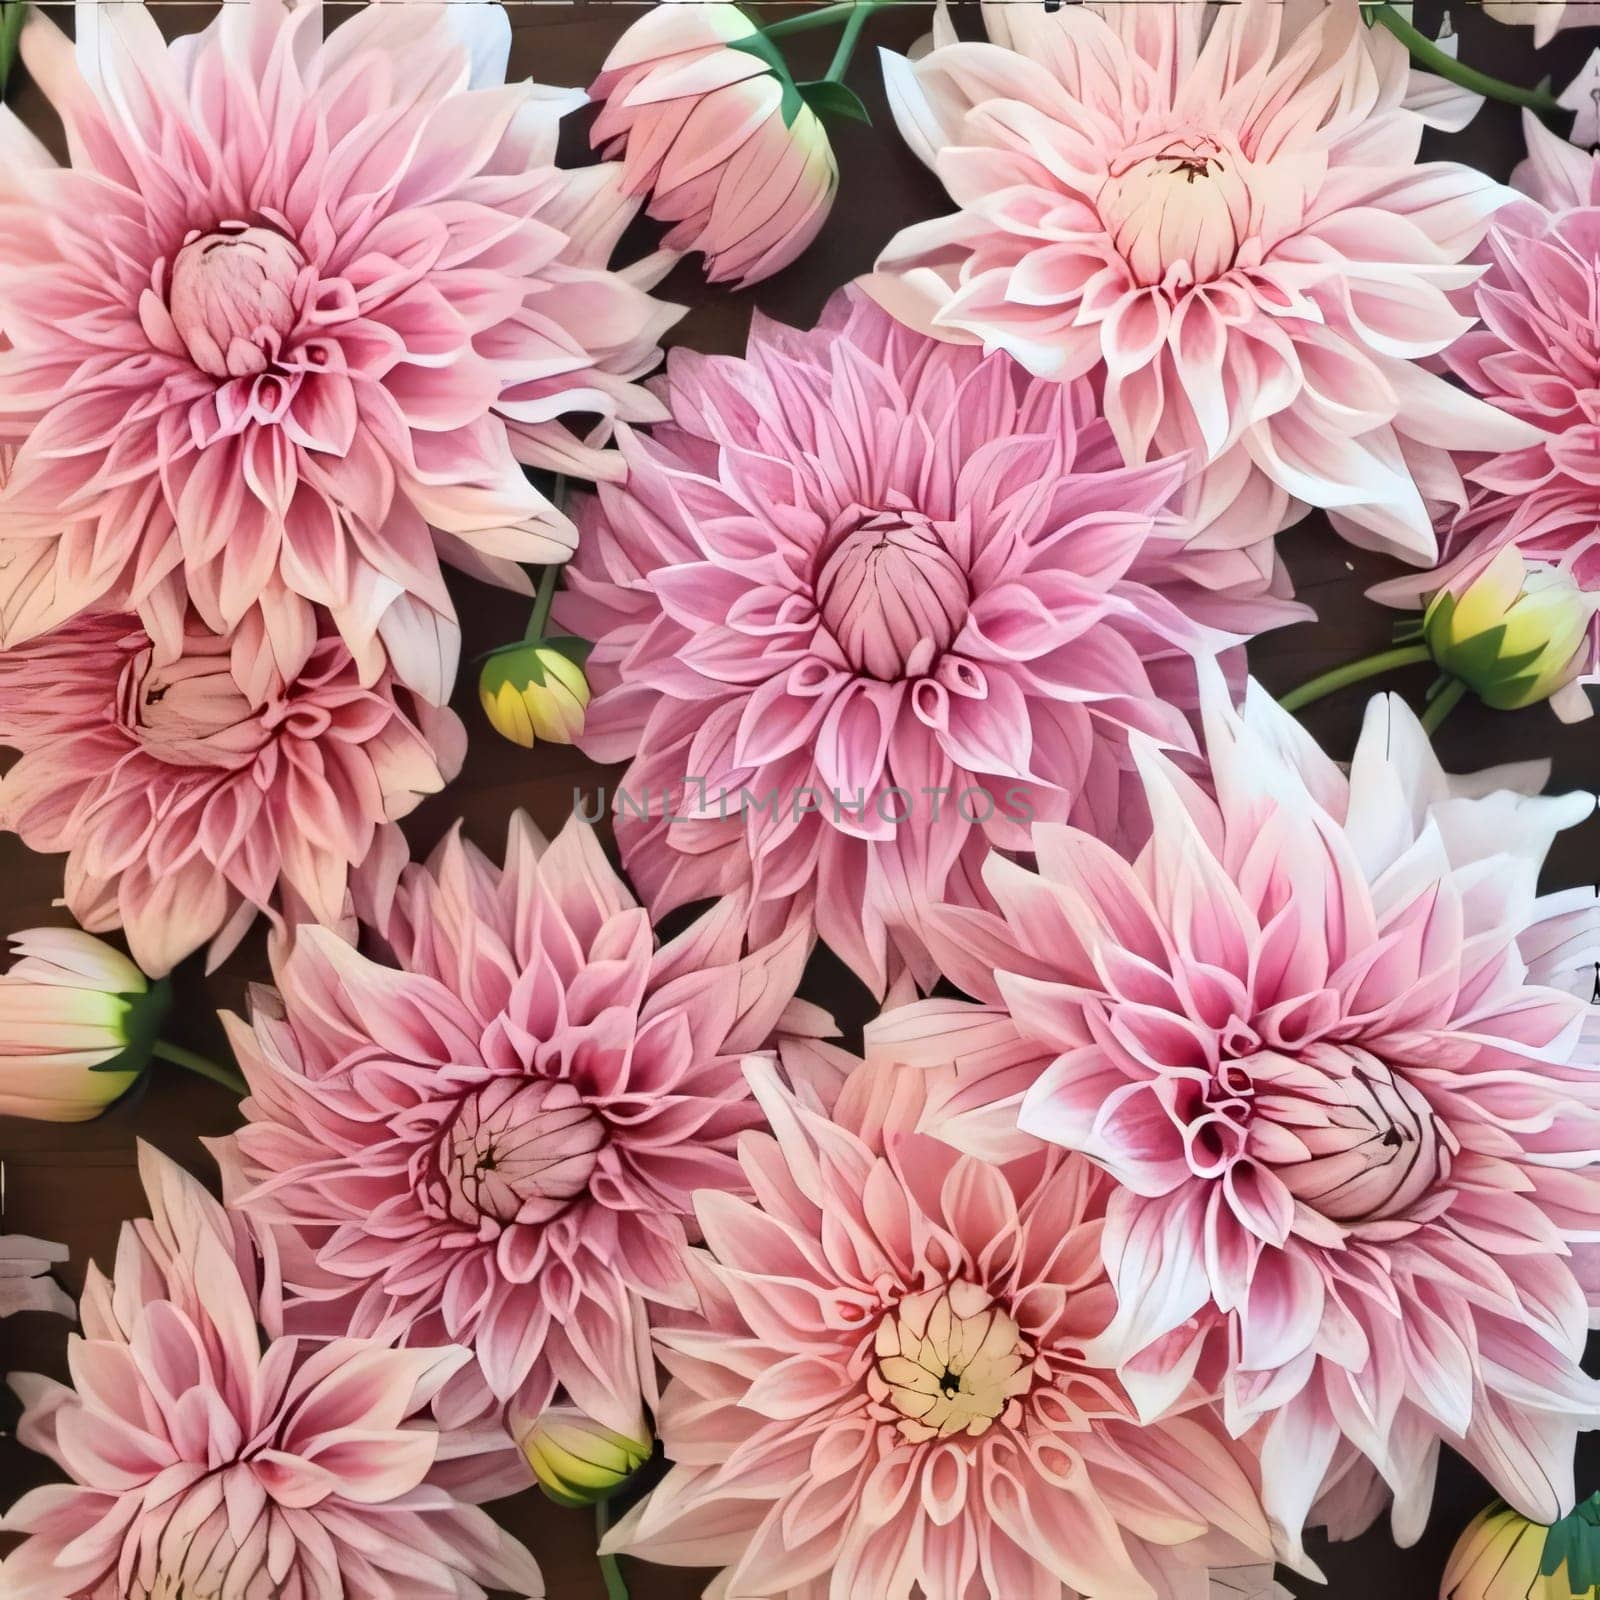 Bouquet of pink and white chrysanthemums. Flowering flowers, a symbol of spring, new life. A joyful time of nature waking up to life.